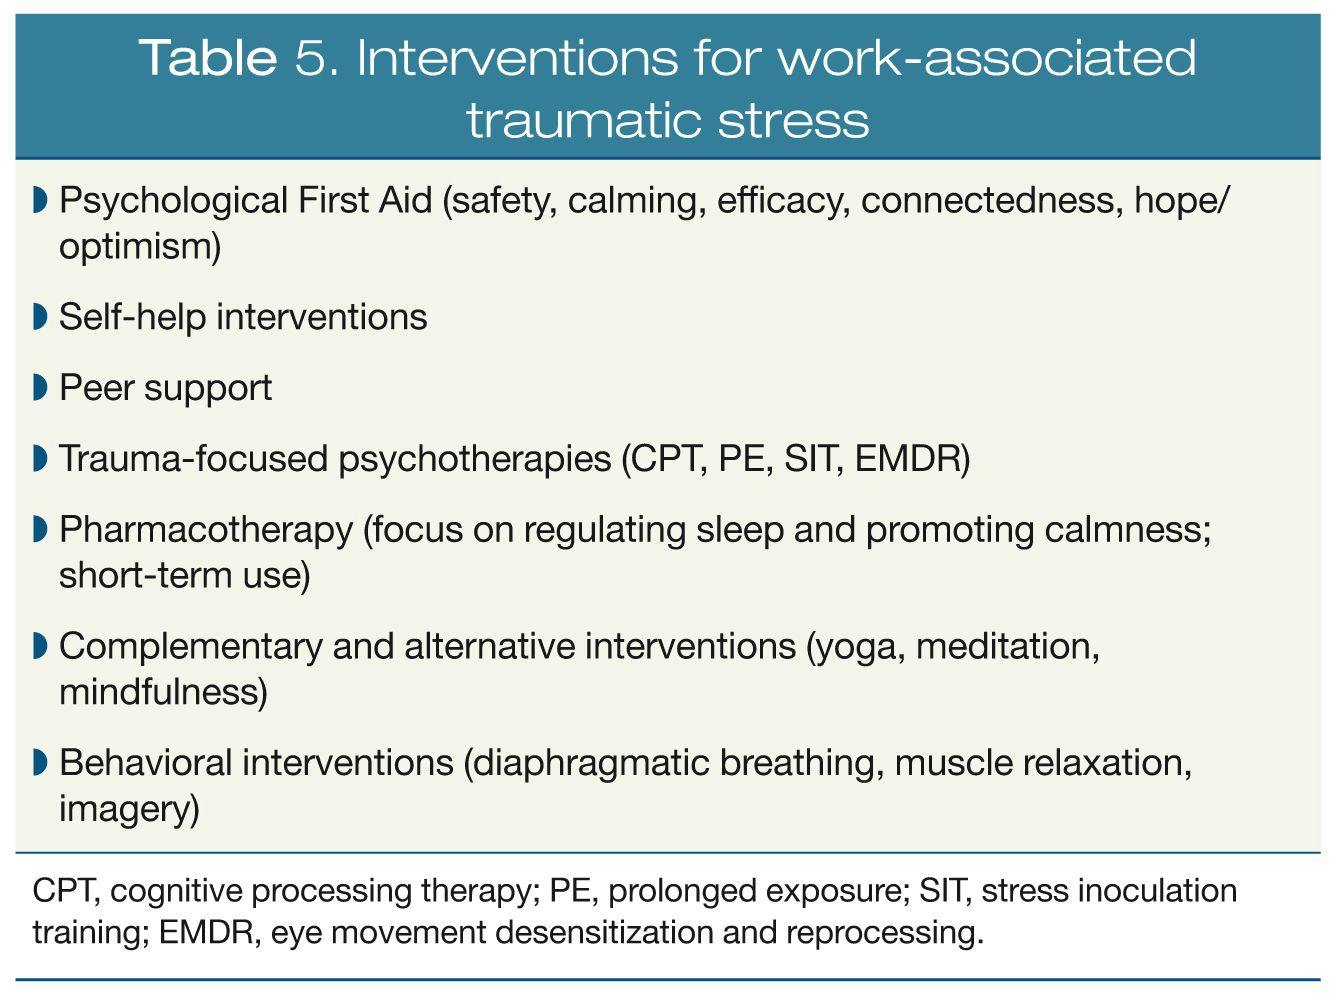 Interventions for work-associated traumatic stress